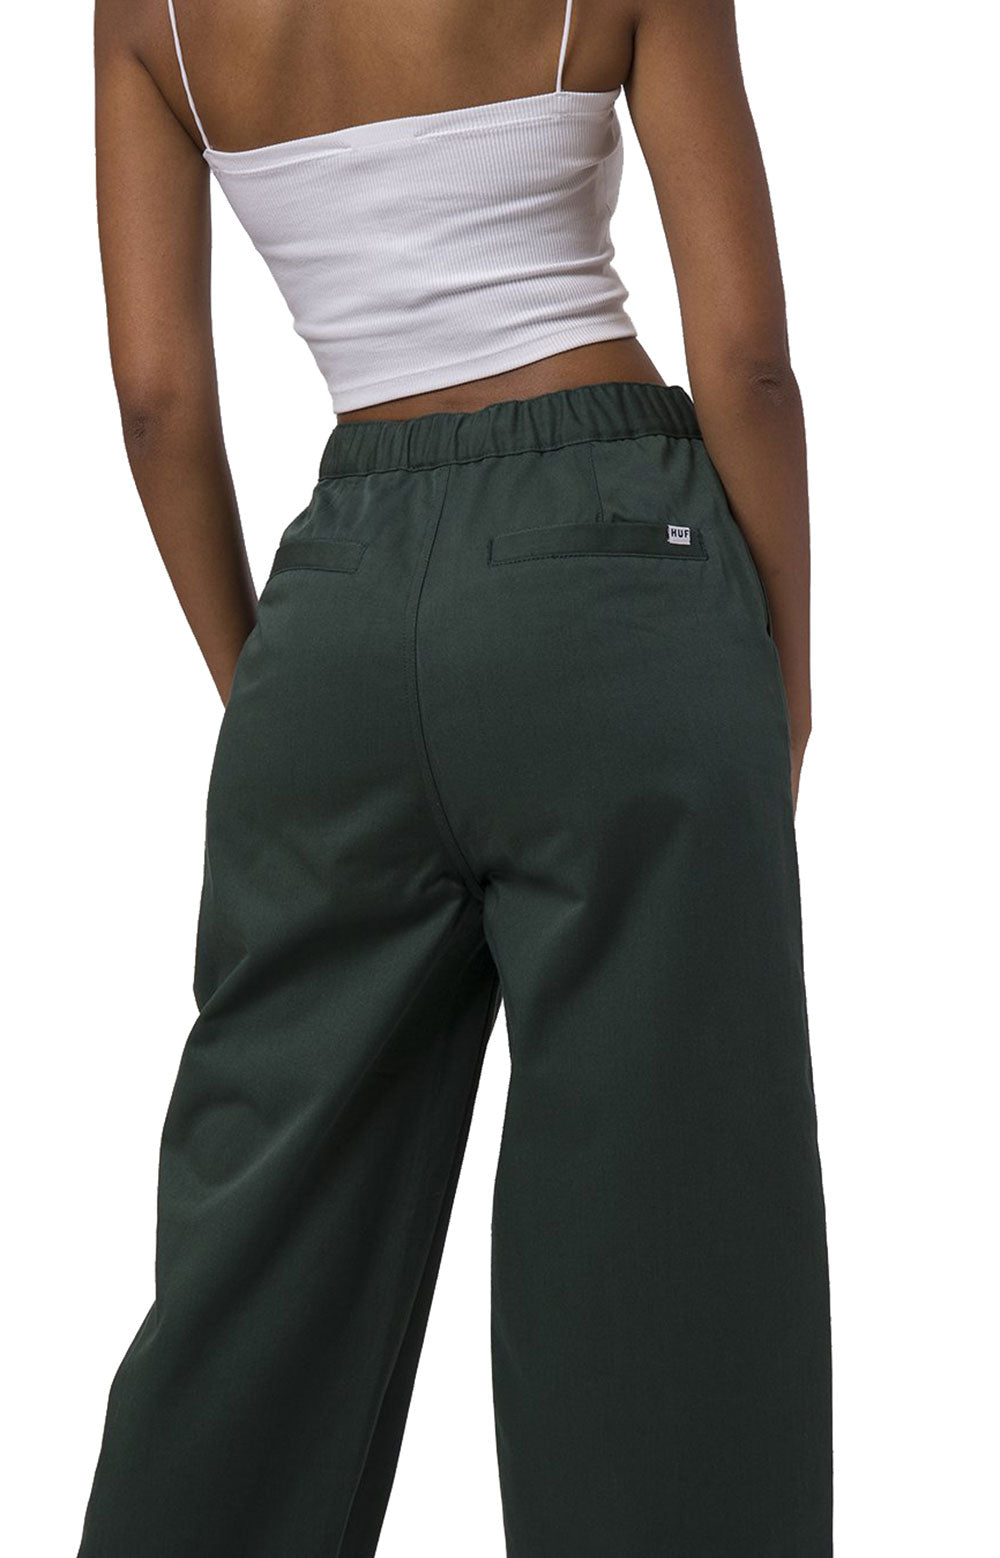 Twill Baggie Pant - Sycamore